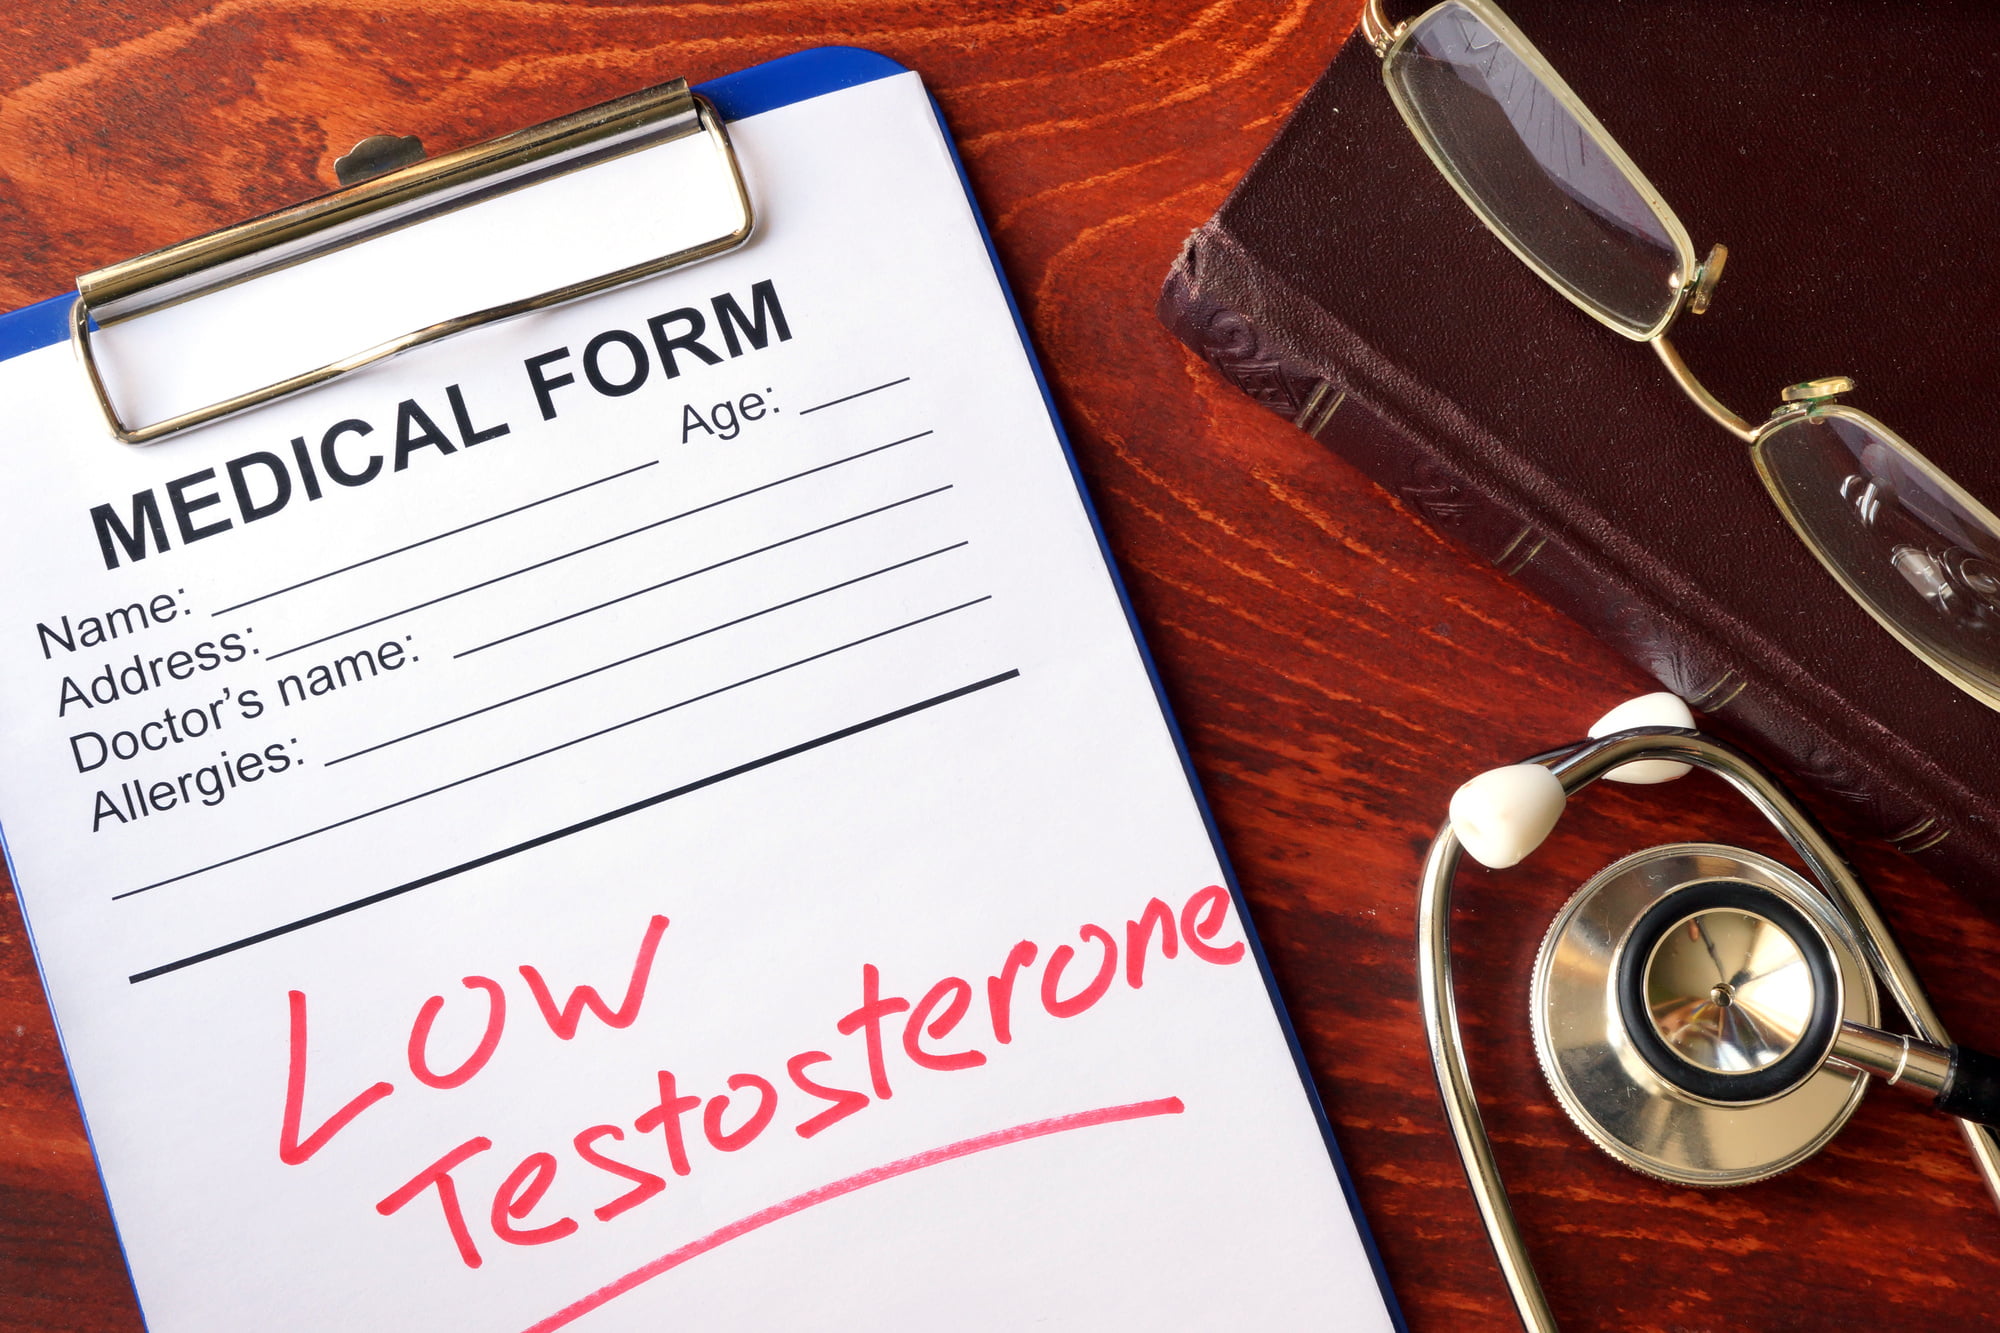 Some signs of low testosterone may surprise you. Take a look at these 7 signs of low T in men as well as a few possible treatment options.